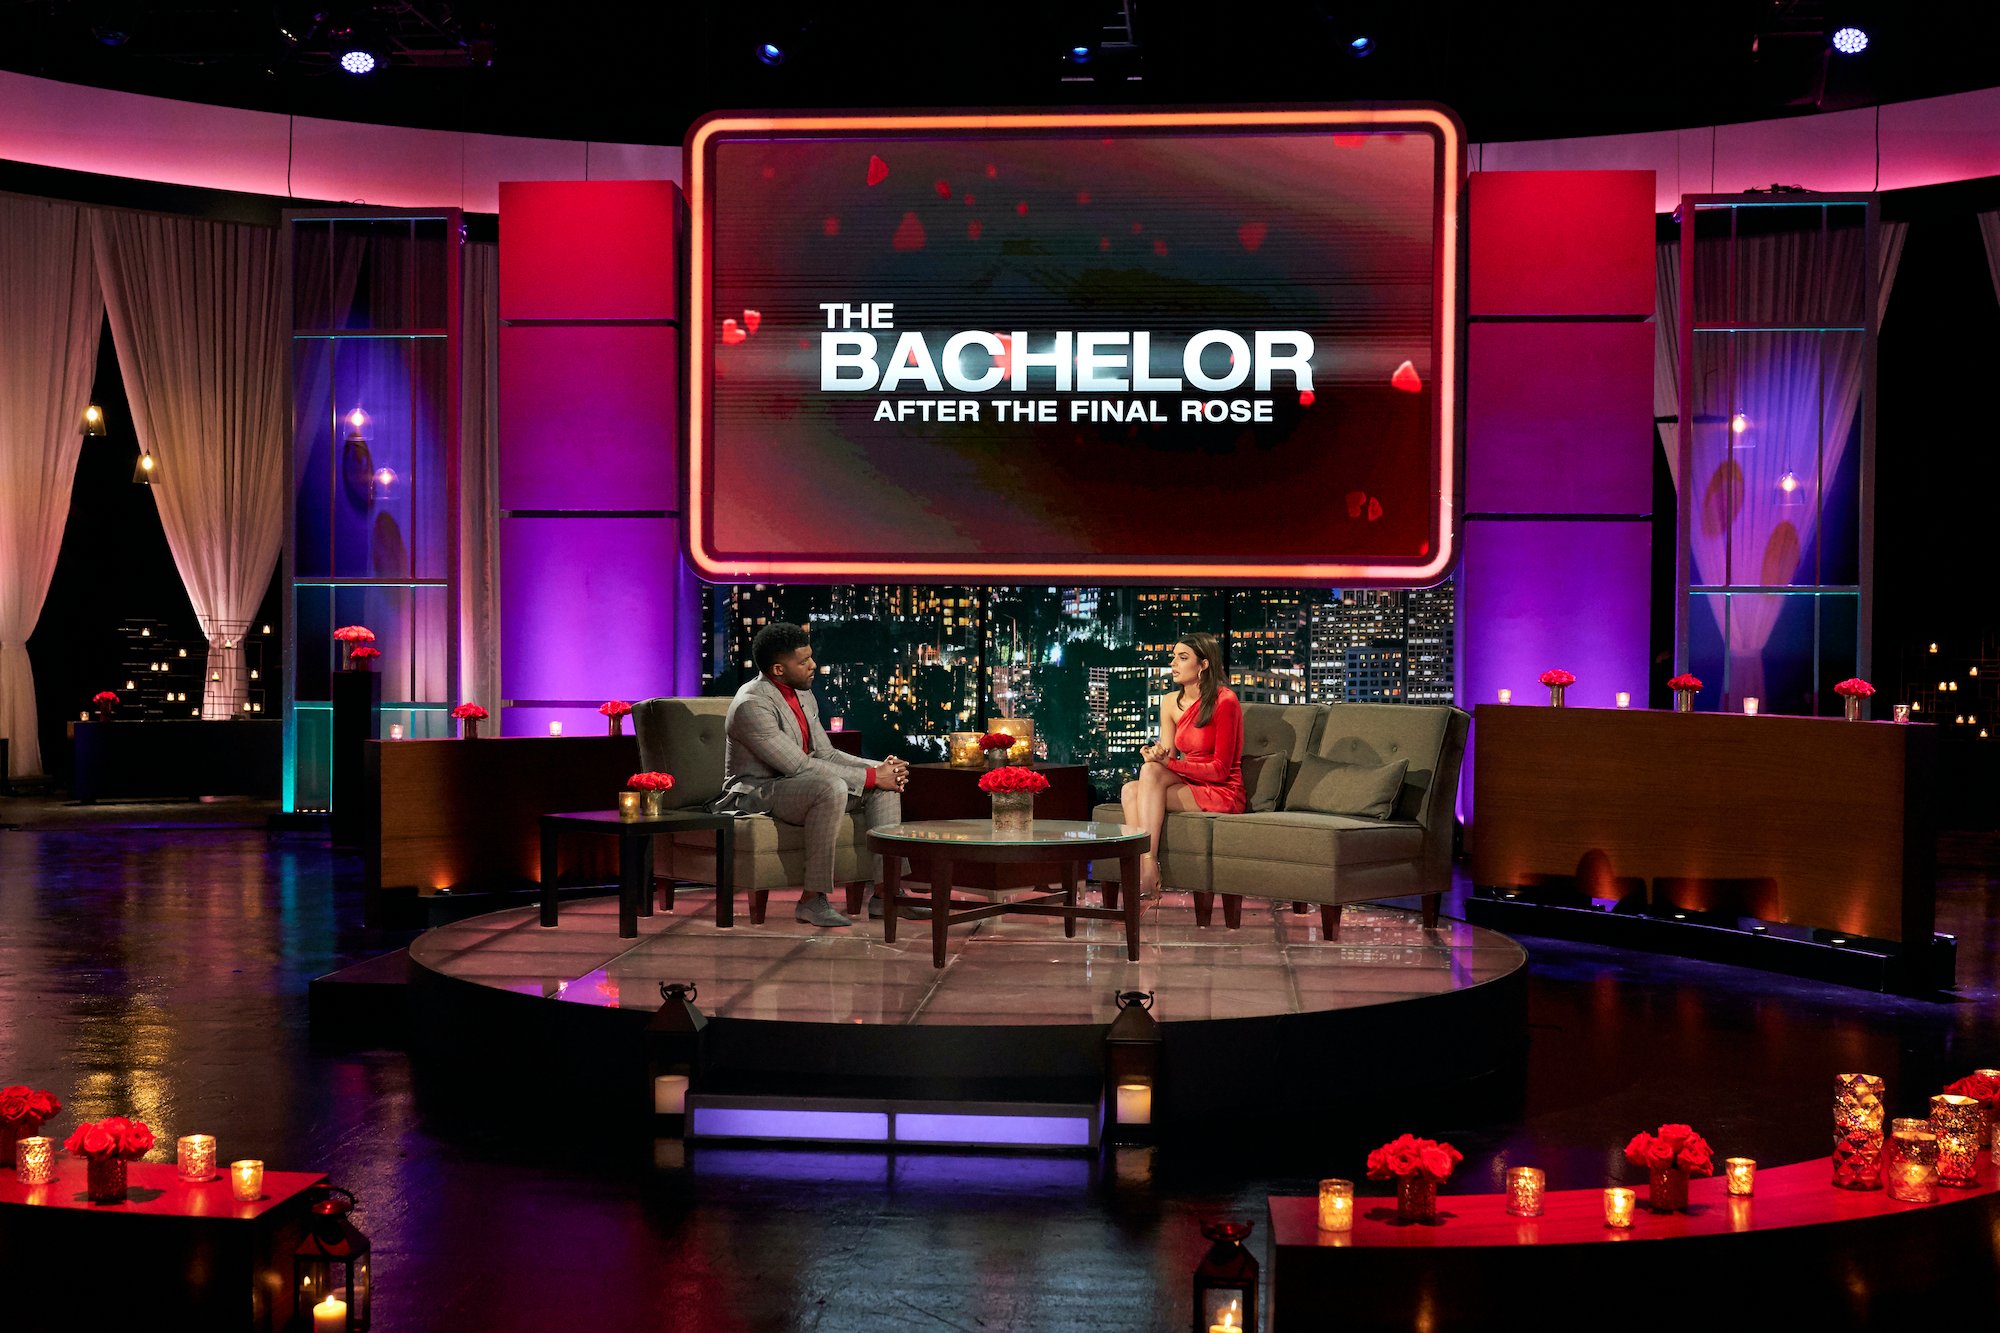 'The Bachelor' After the Final Rose stage